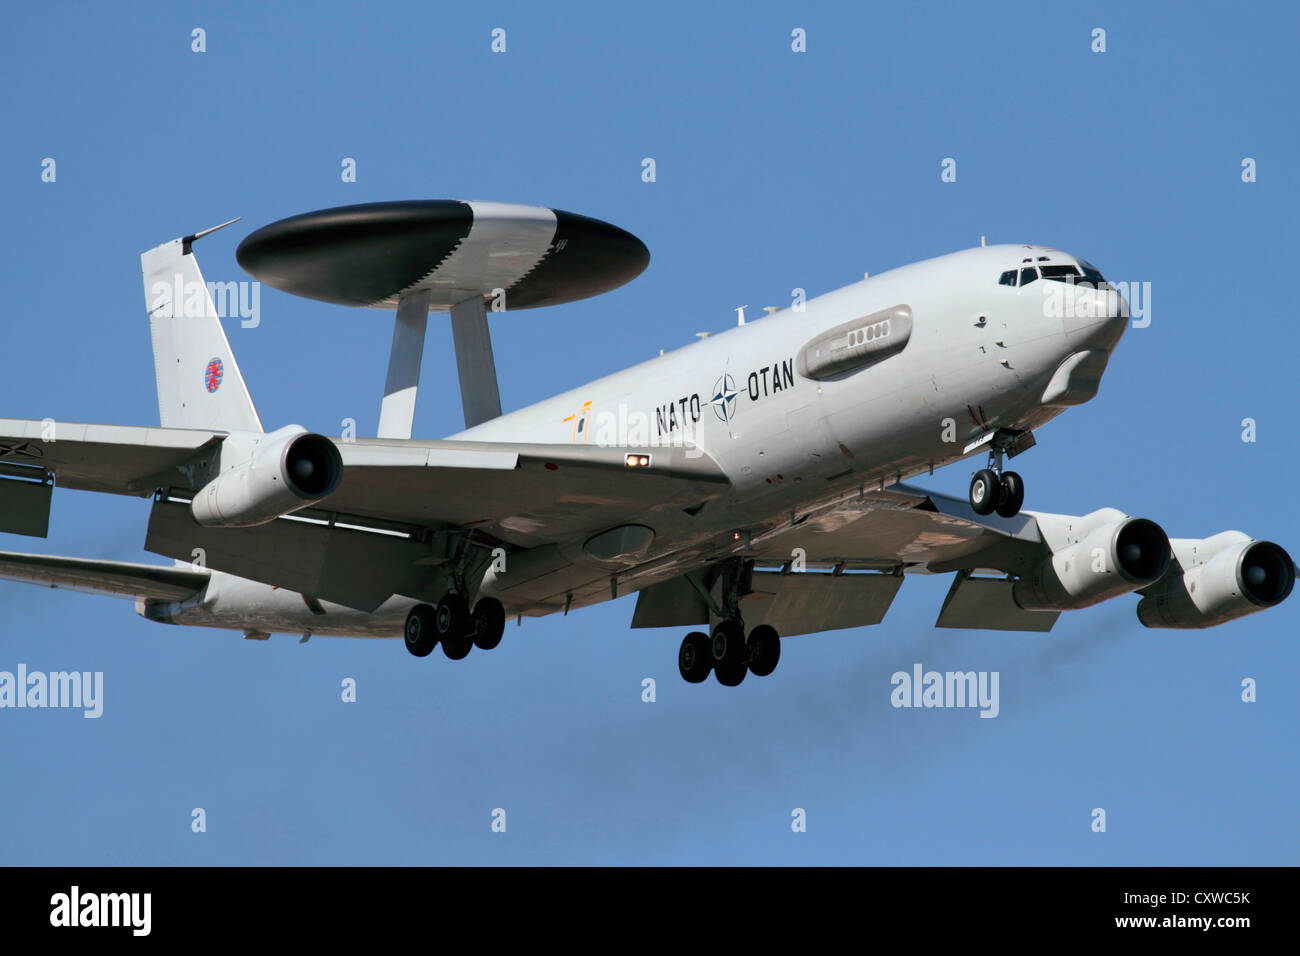 Military Aviation And Technology Nato Boeing E 3 Sentry Awacs Airborne Radar Surveillance And Communications Aircraft Stock Photo Alamy